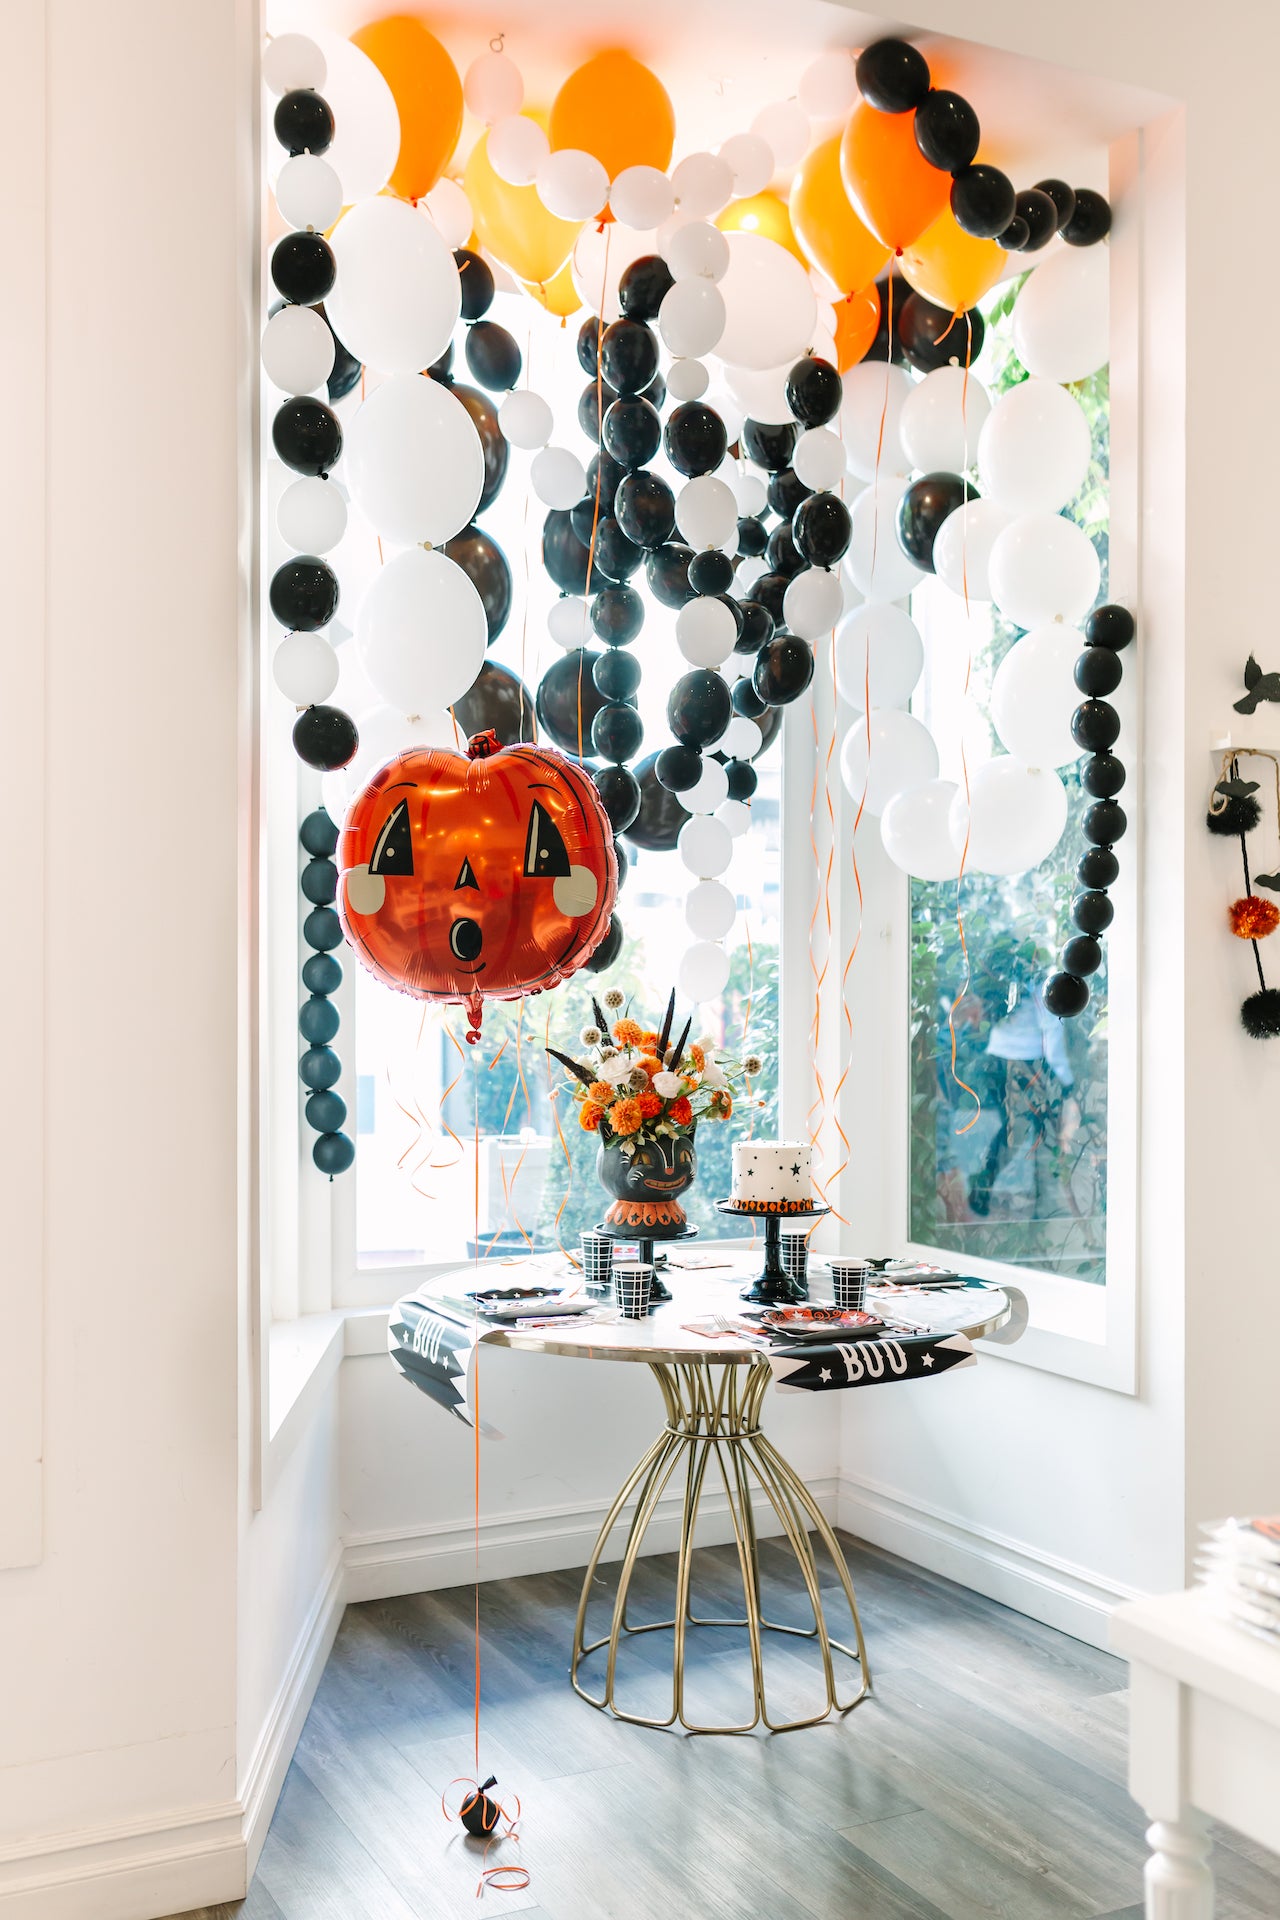 Vintage Halloween party table with balloon garlands.